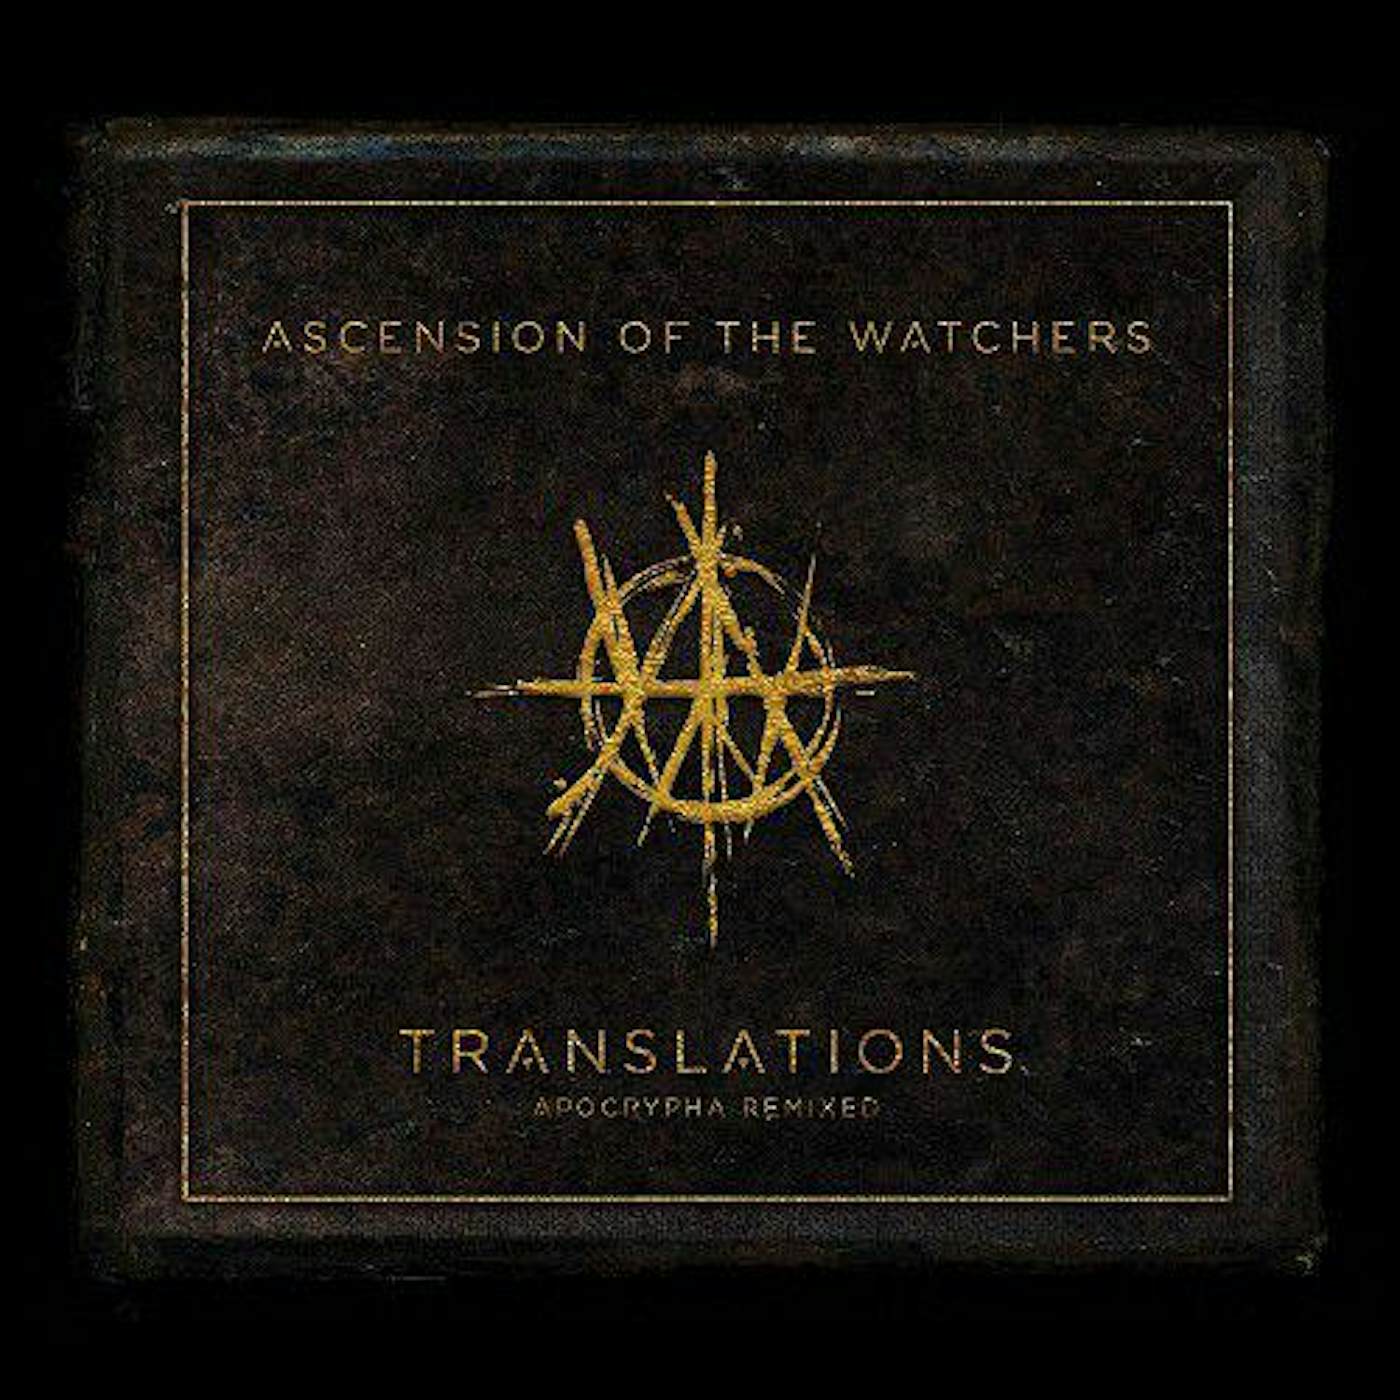 Ascension Of The Watchers TRANSLATIONS CD